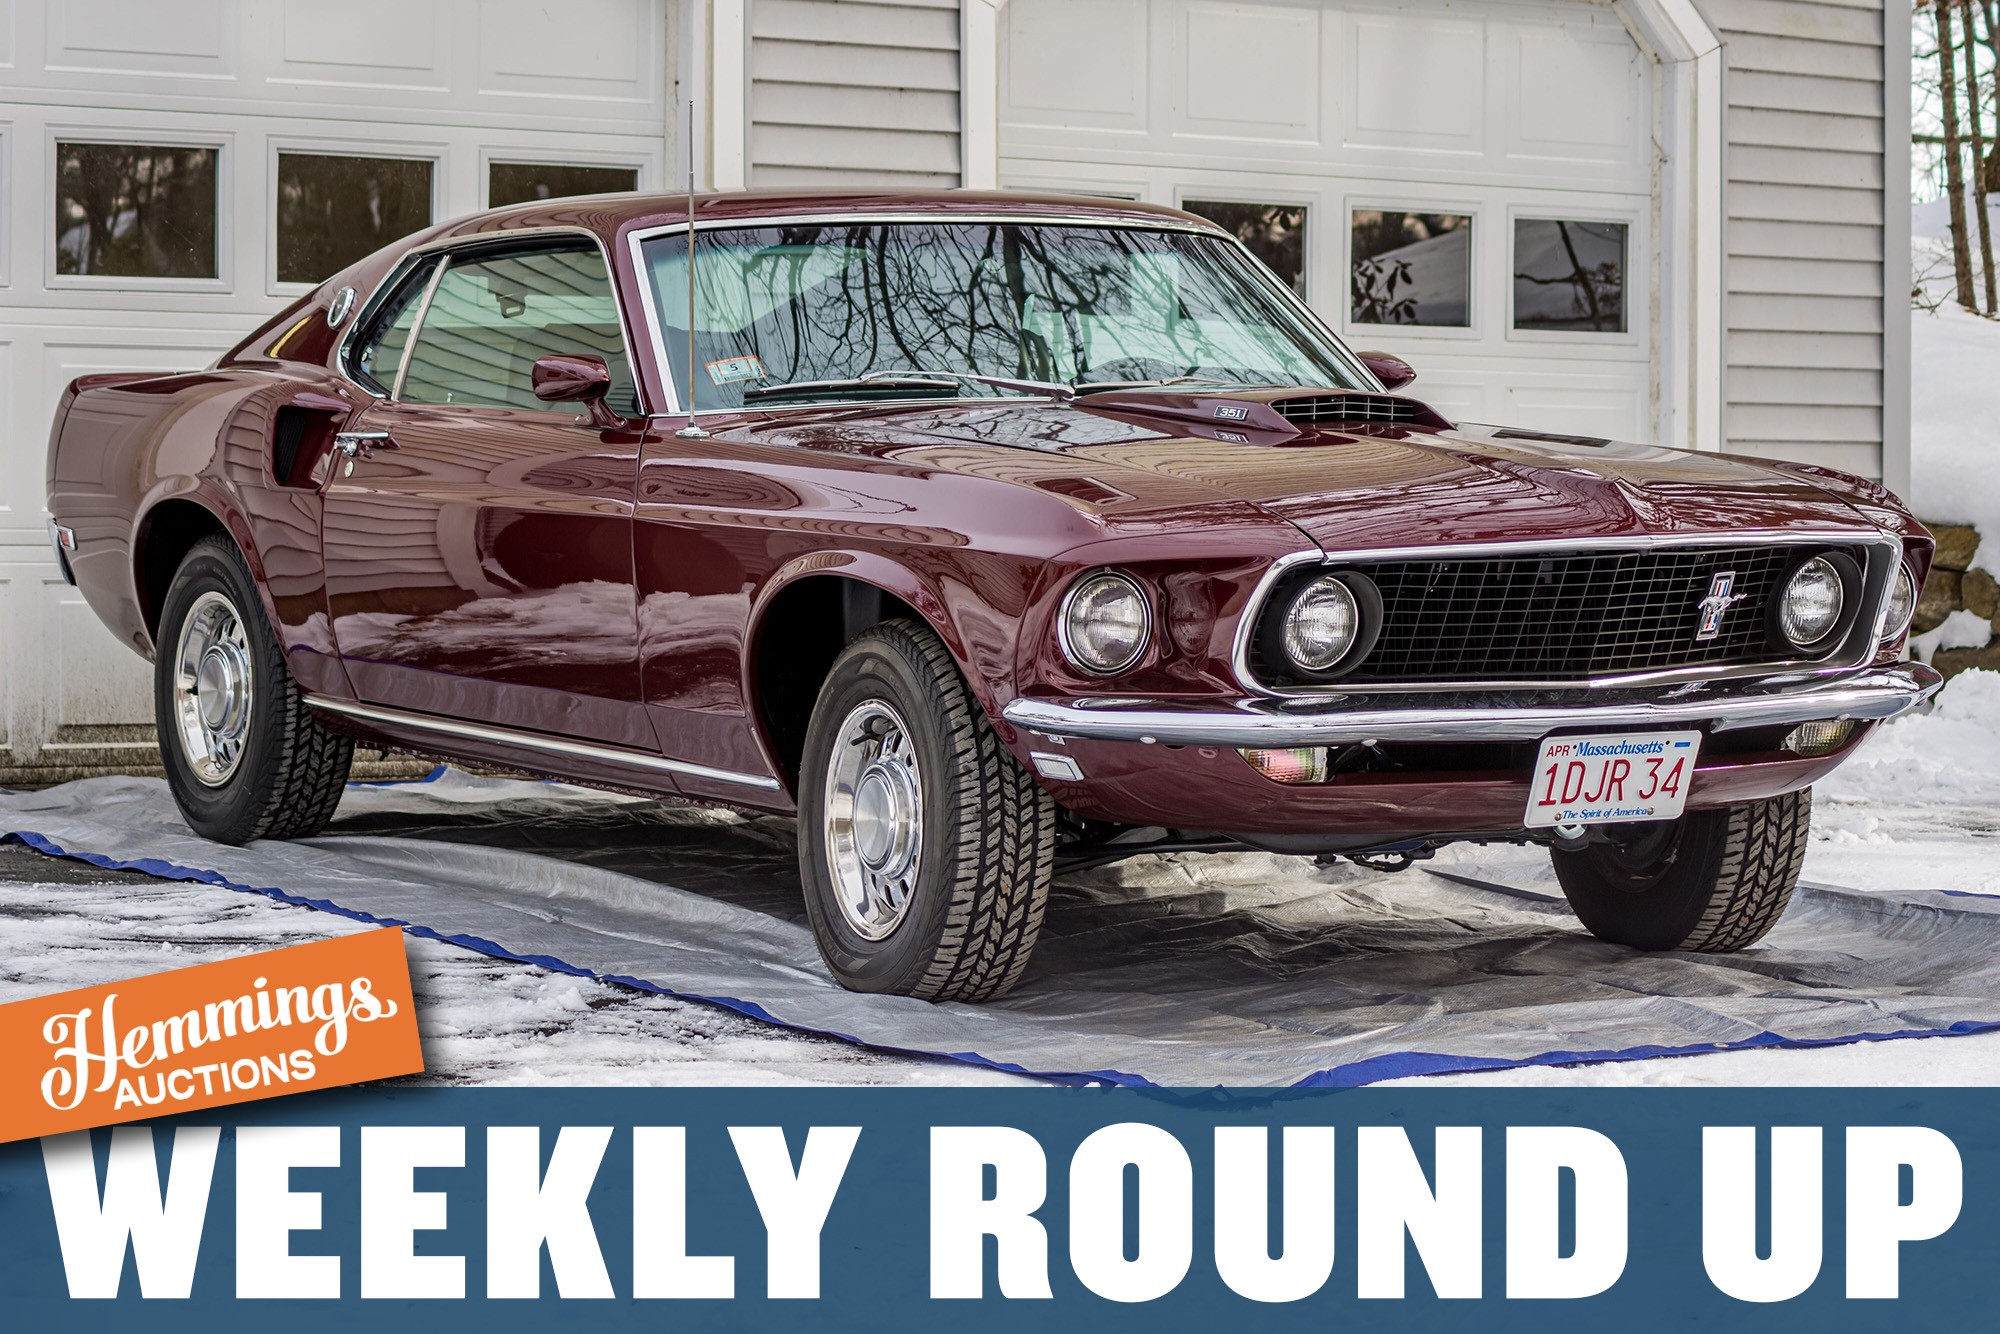 Hemmings Auctions Weekly Round Up: 1969 Ford Mustang Mach 1, 1999 BMW M Coupe, 1946 Lincoln Continental